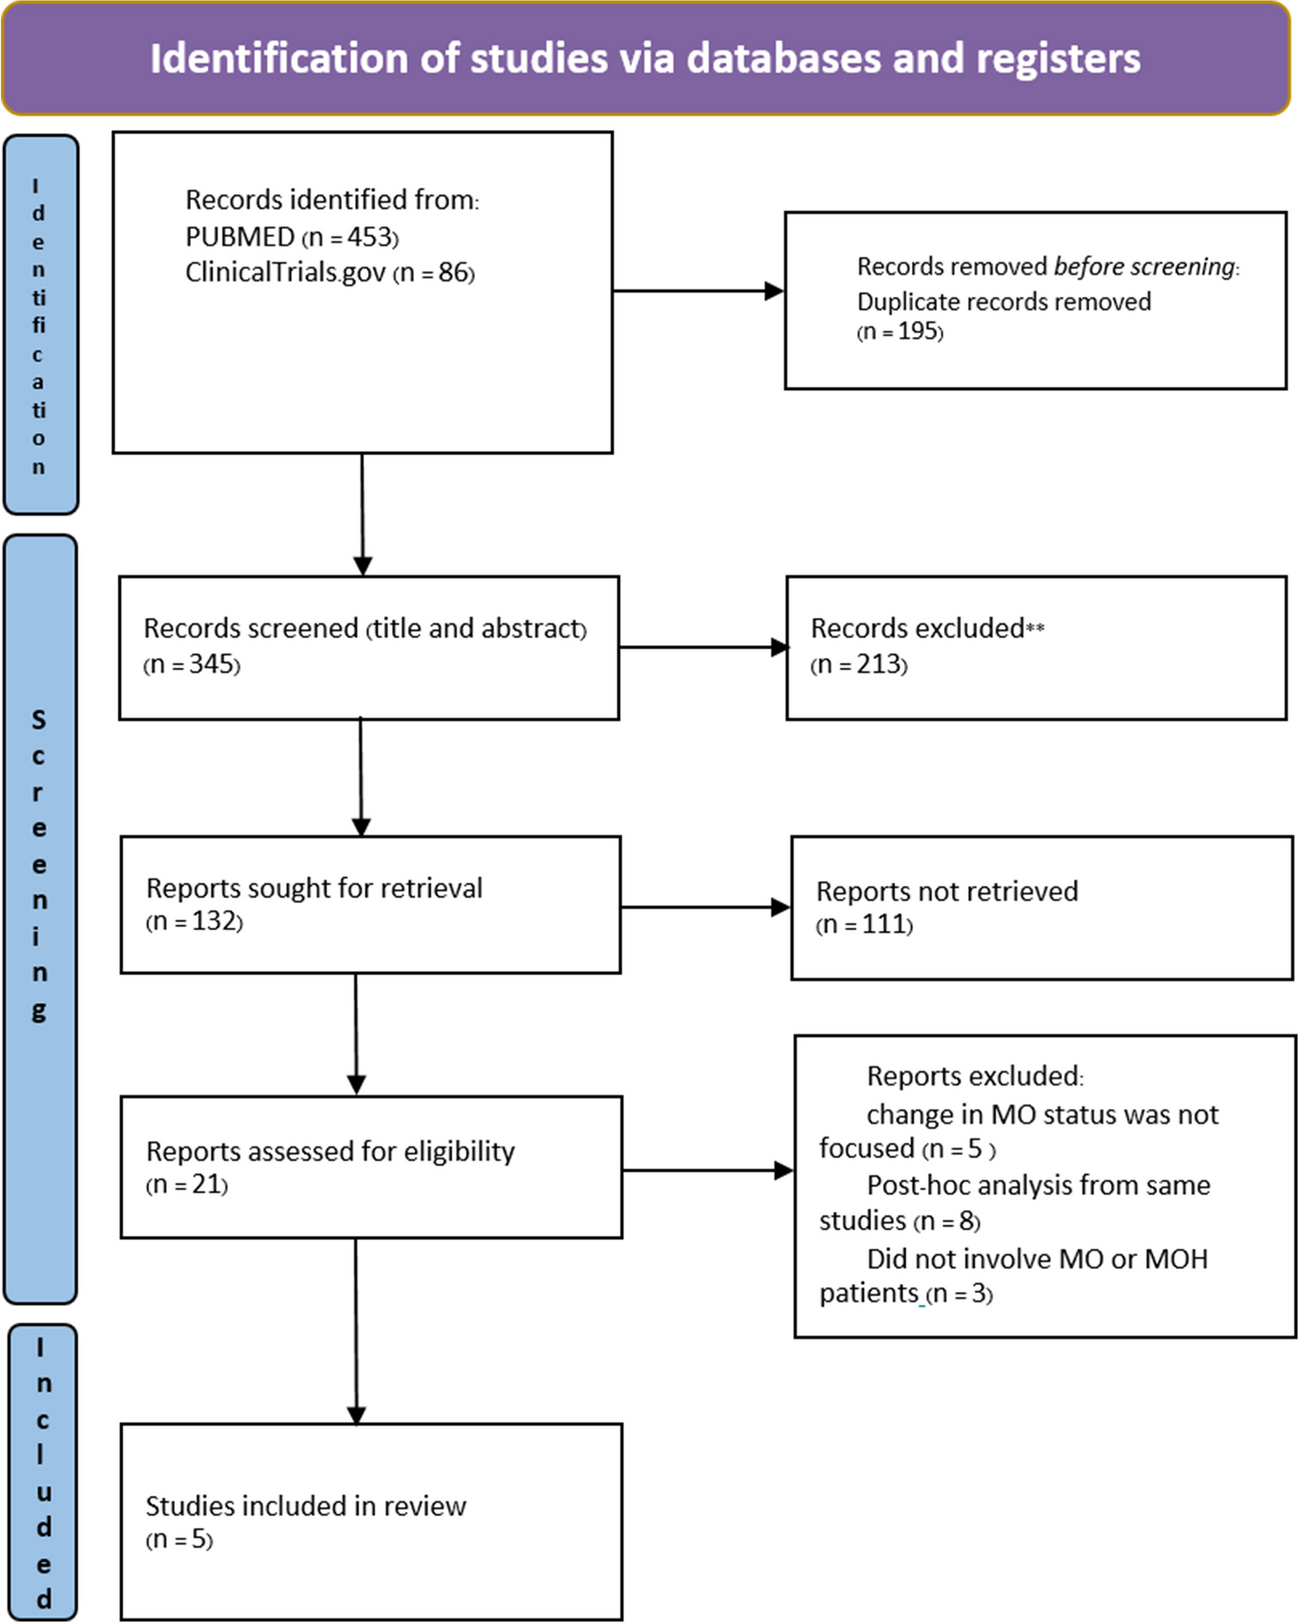 The transition of medication overuse status by acute medication categories in episodic or chronic migraine patients to non-overuse status after receiving anti-CGRP monoclonal antibodies: a systematic review and meta-analysis of phase 3 randomized control trial